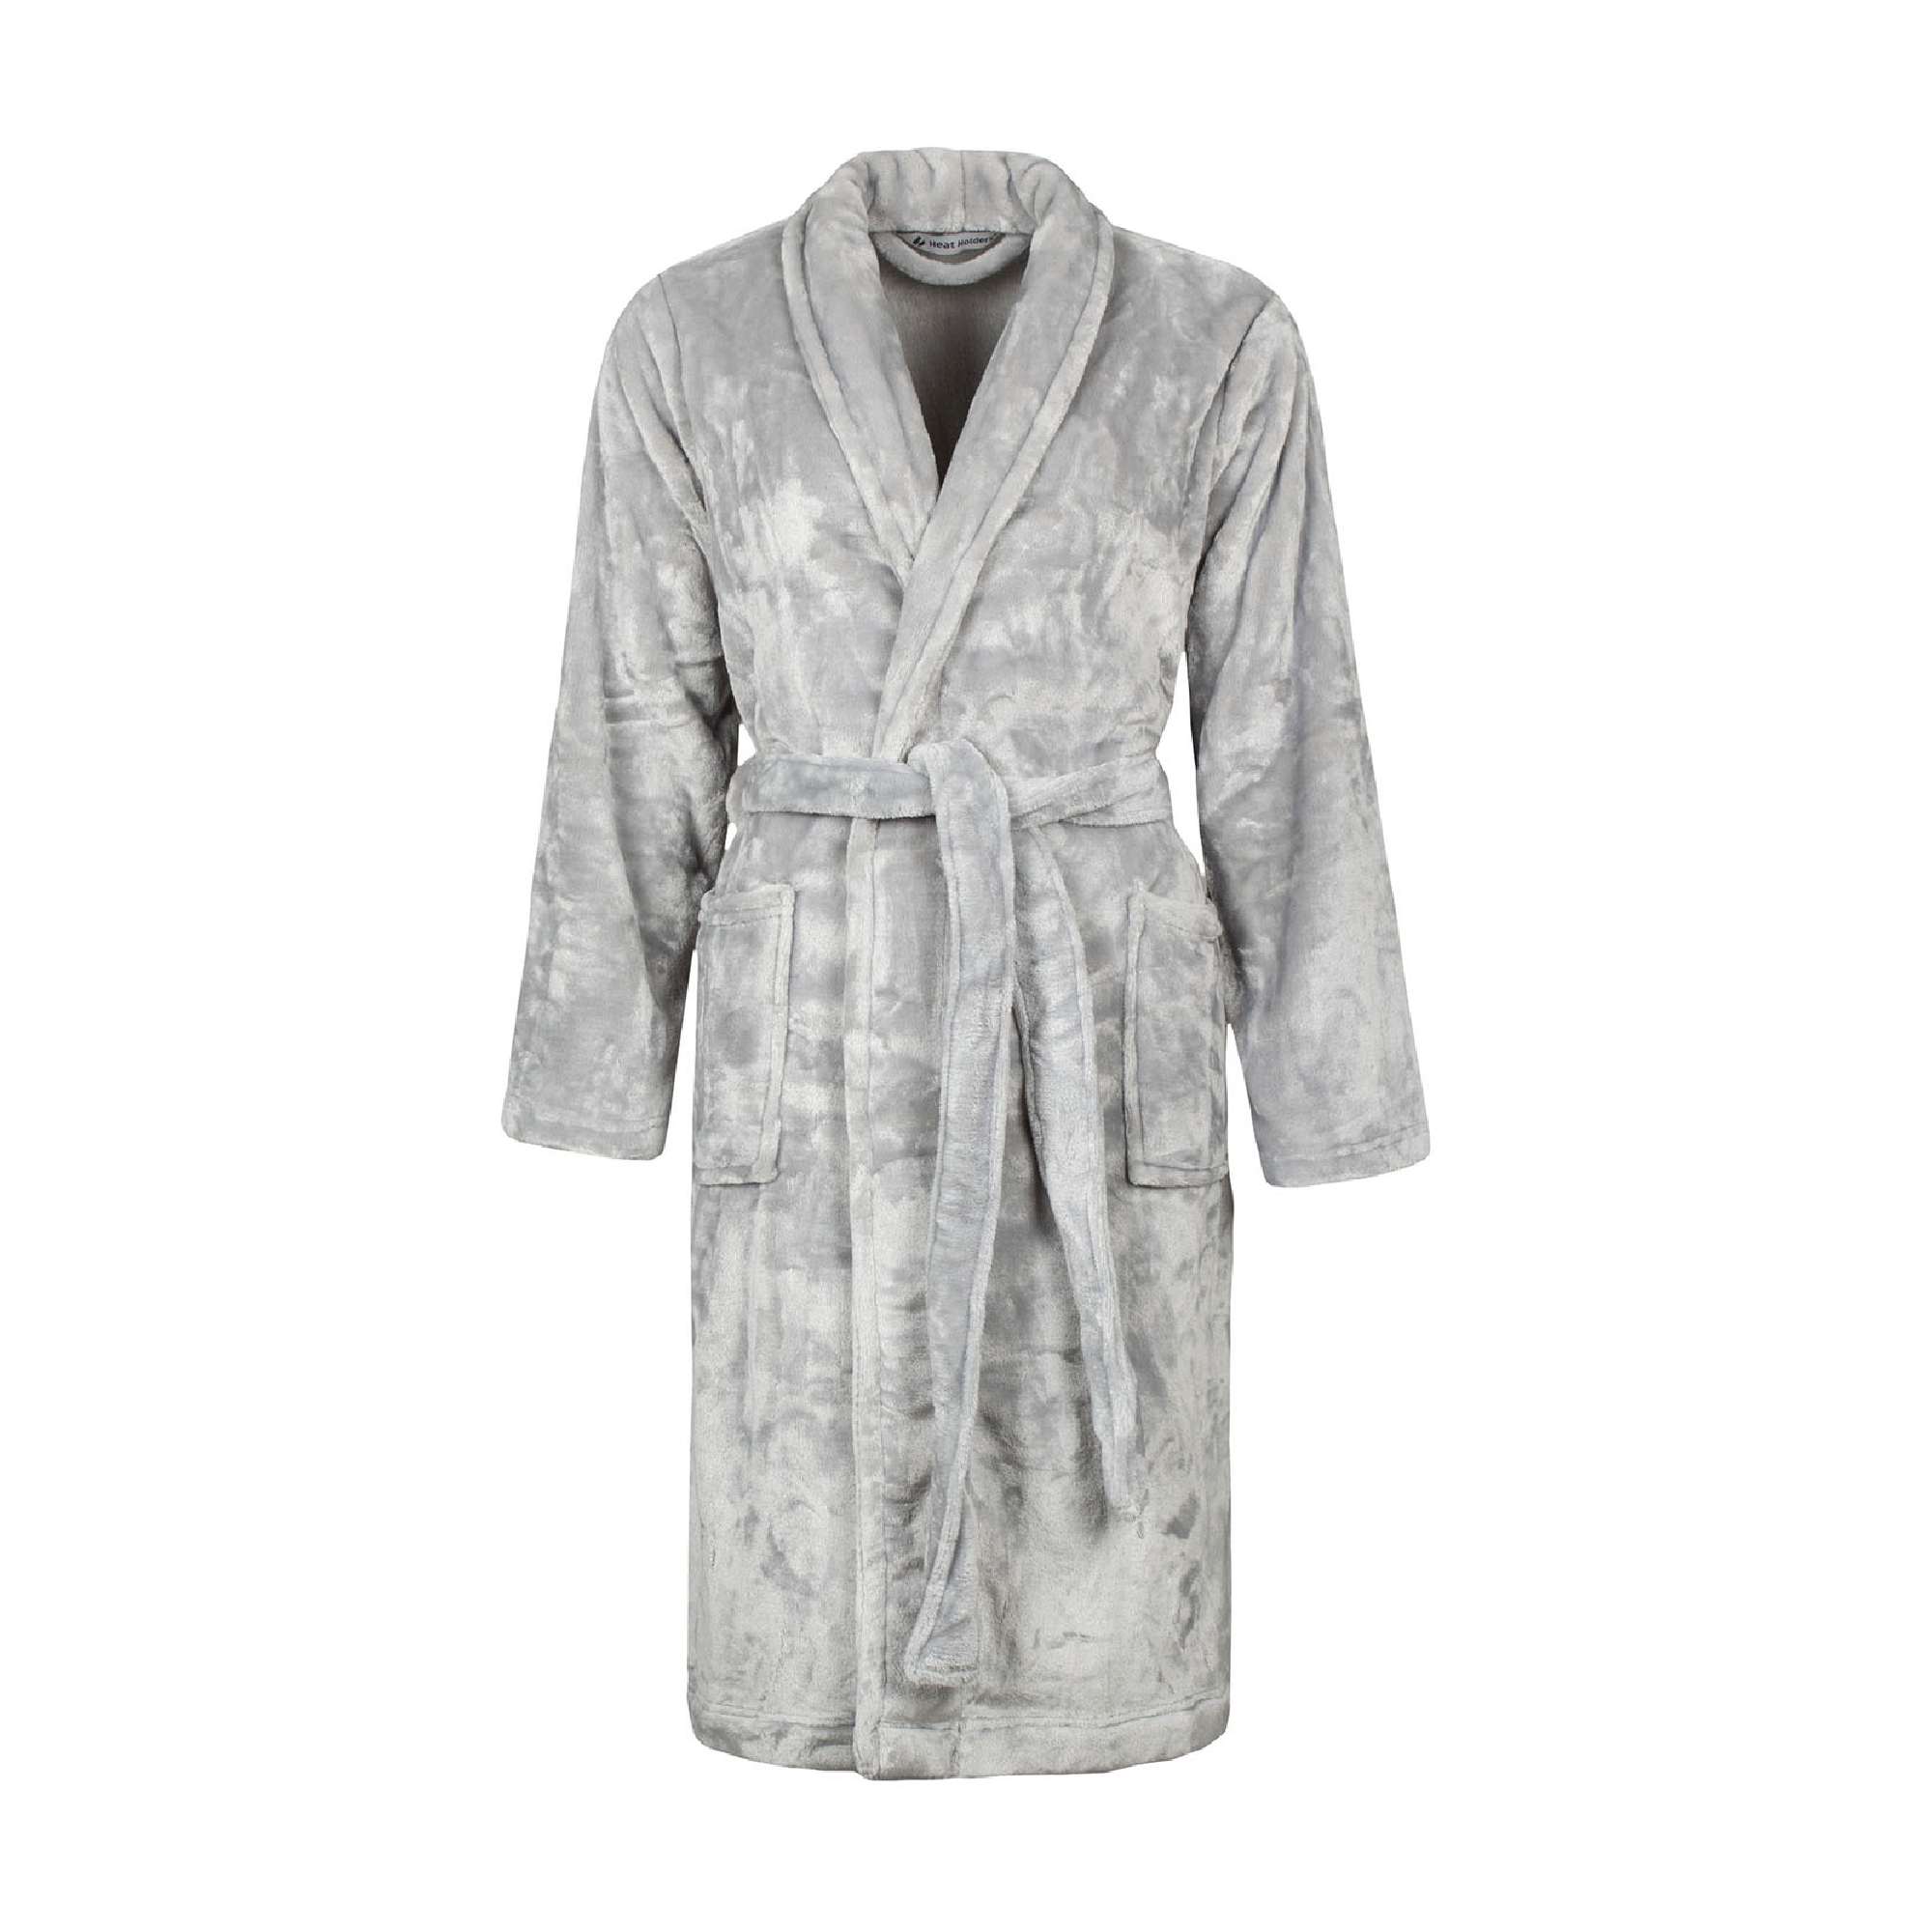 Luxury Bathrobes :: Plush Robes :: Super Soft Blush Pink Plush Hooded  Women's Robe - Wholesale bathrobes, Spa robes, Kids robes, Cotton robes,  Spa Slippers, Wholesale Towels